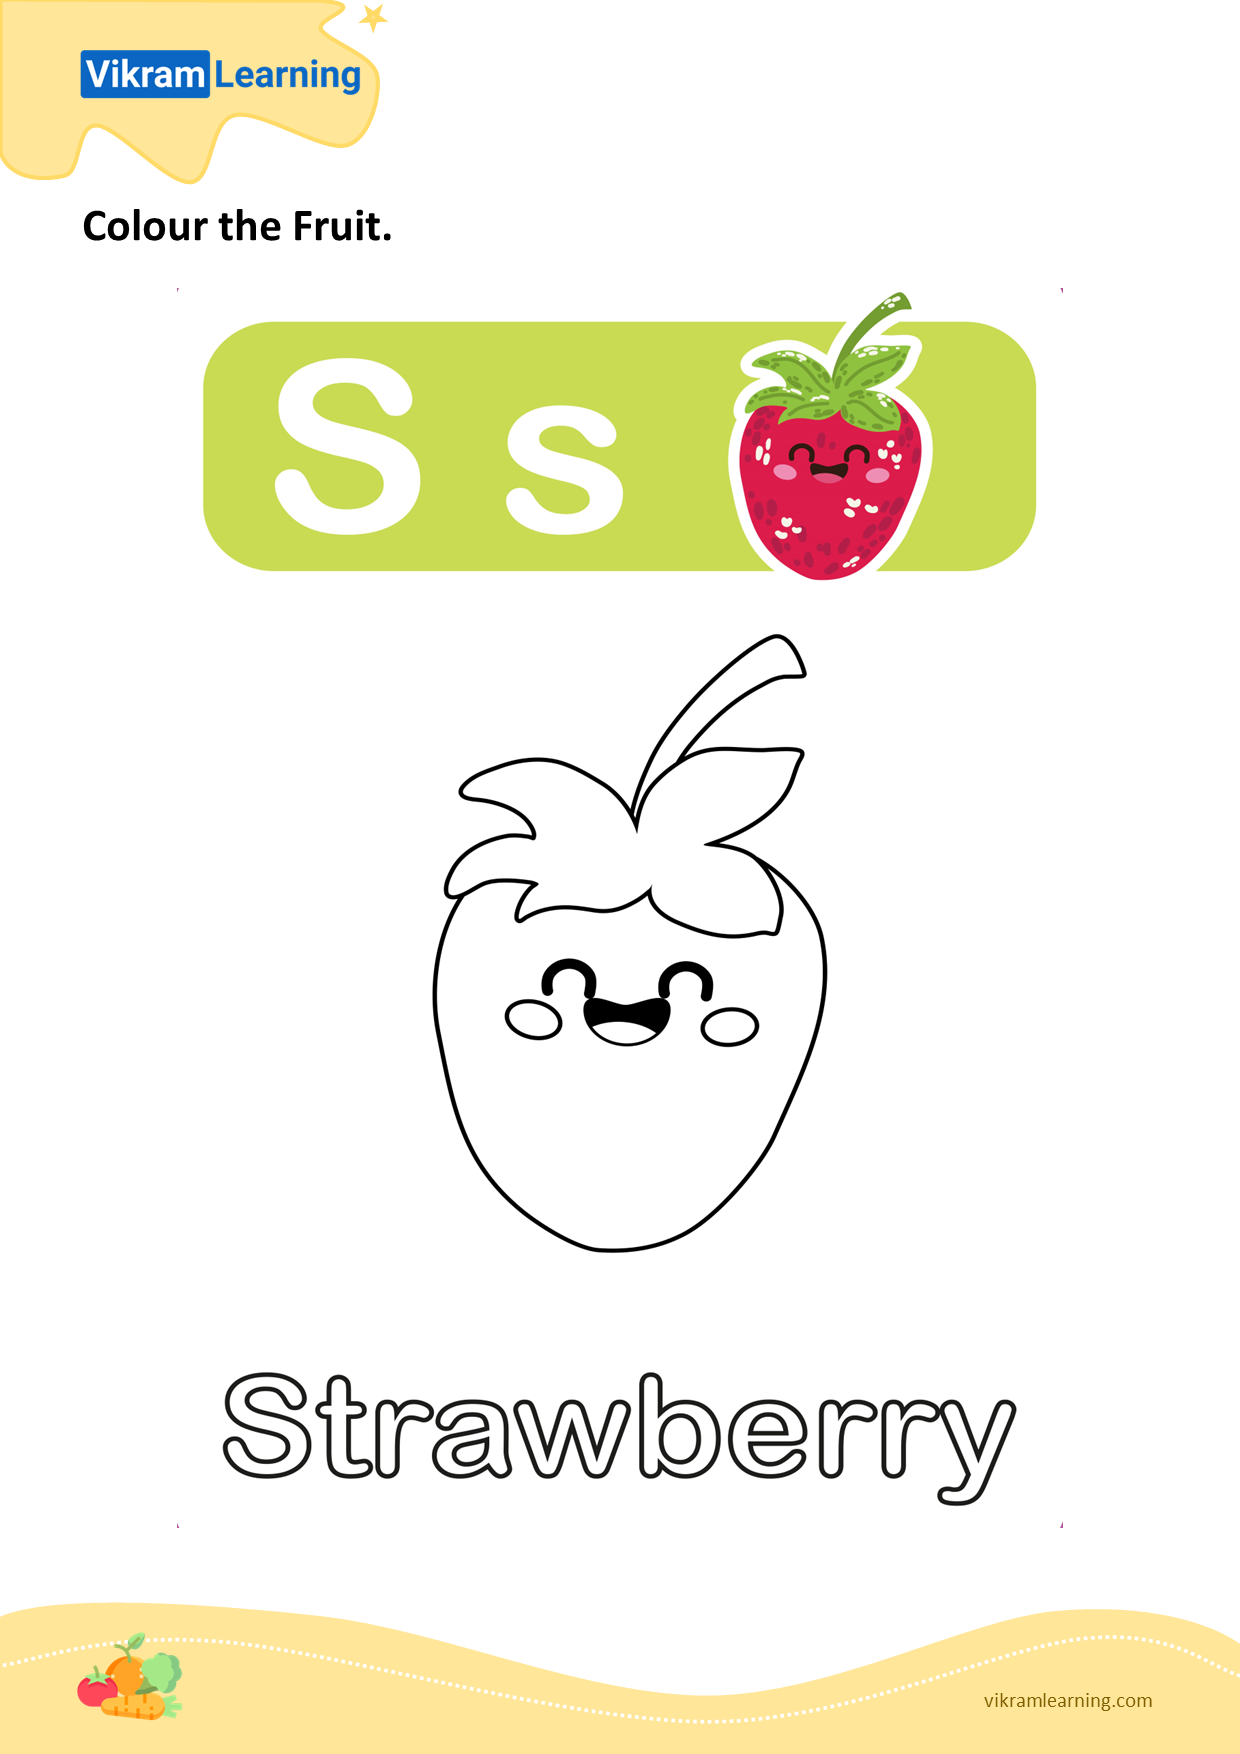 Download colour the fruit - strawberry worksheets